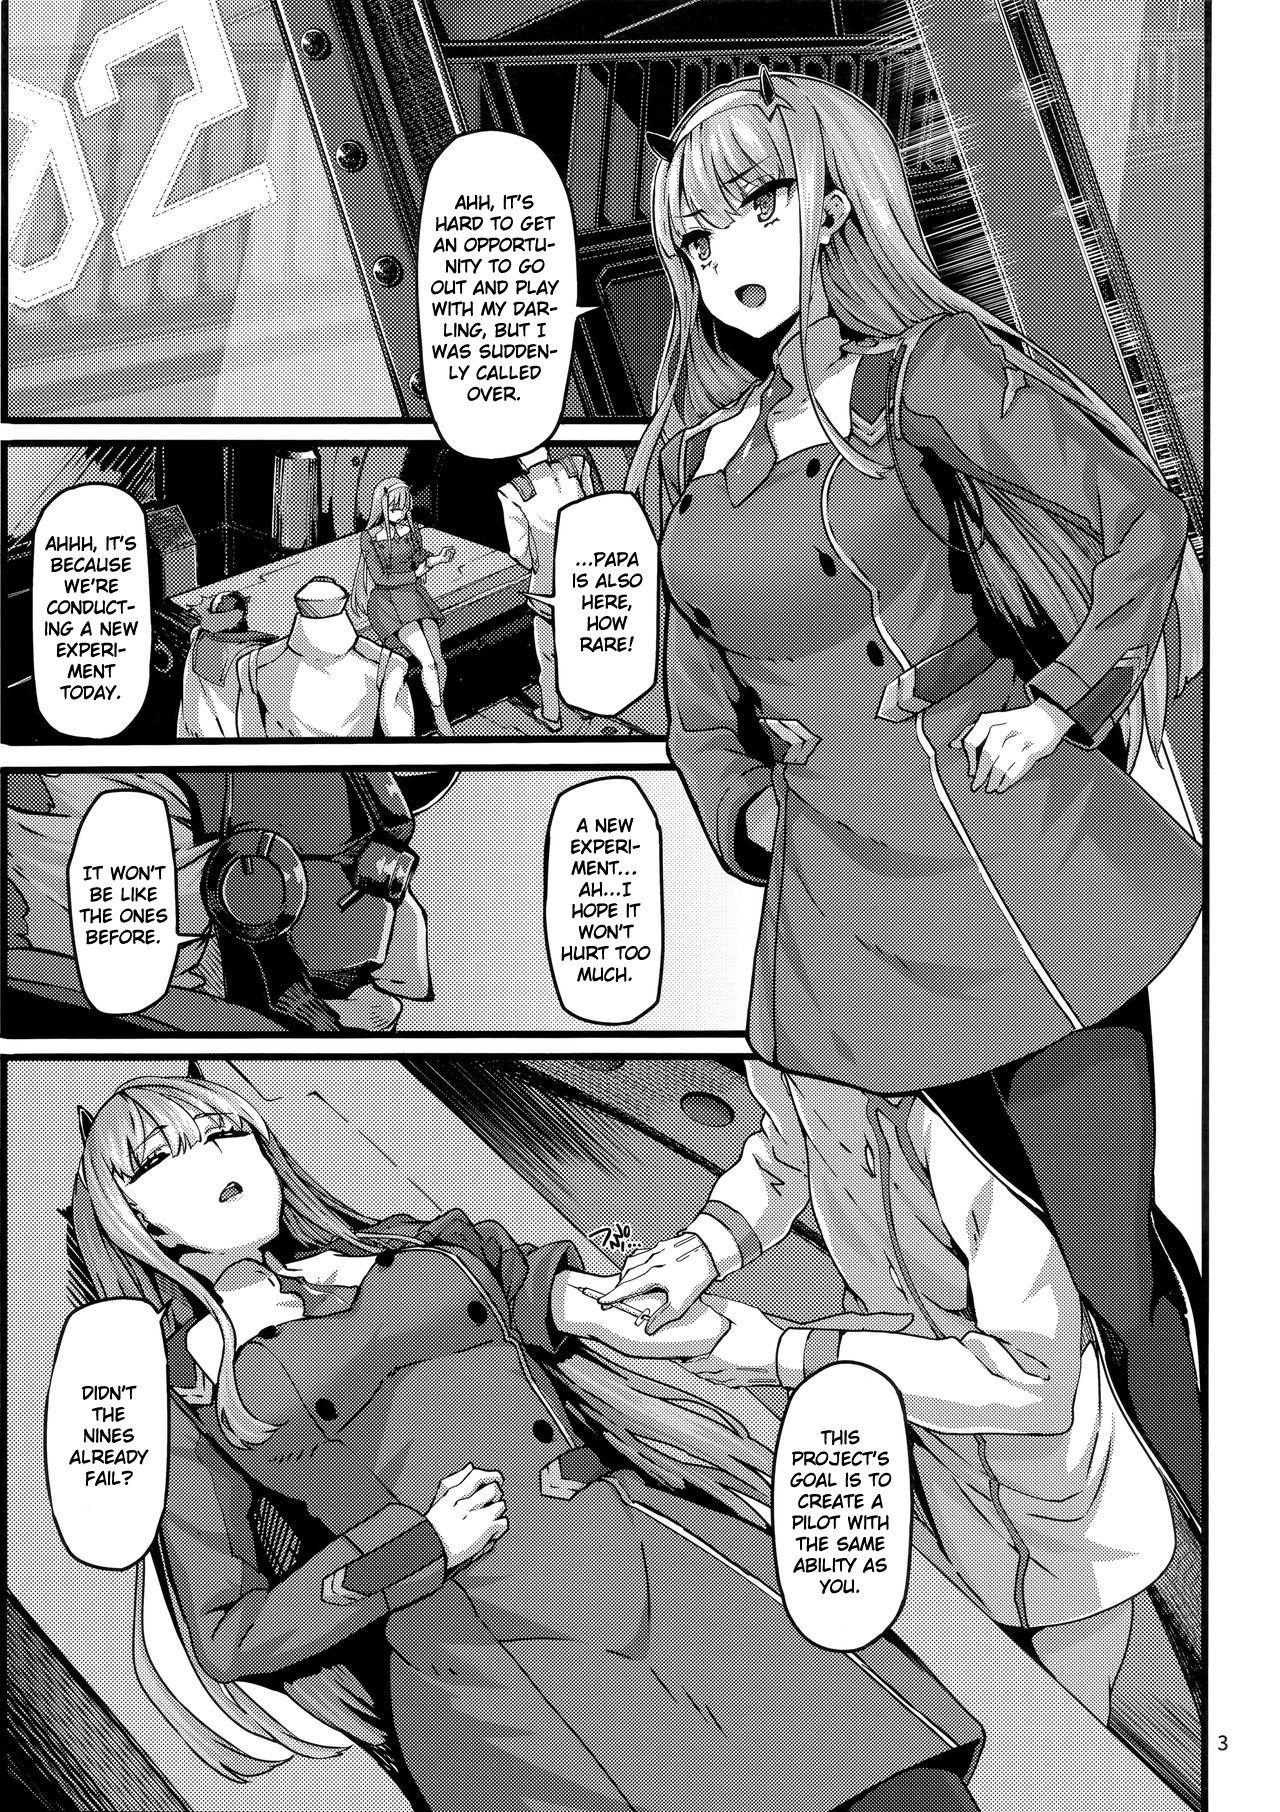 Gilf reginae - Darling in the franxx Shoes - Page 2